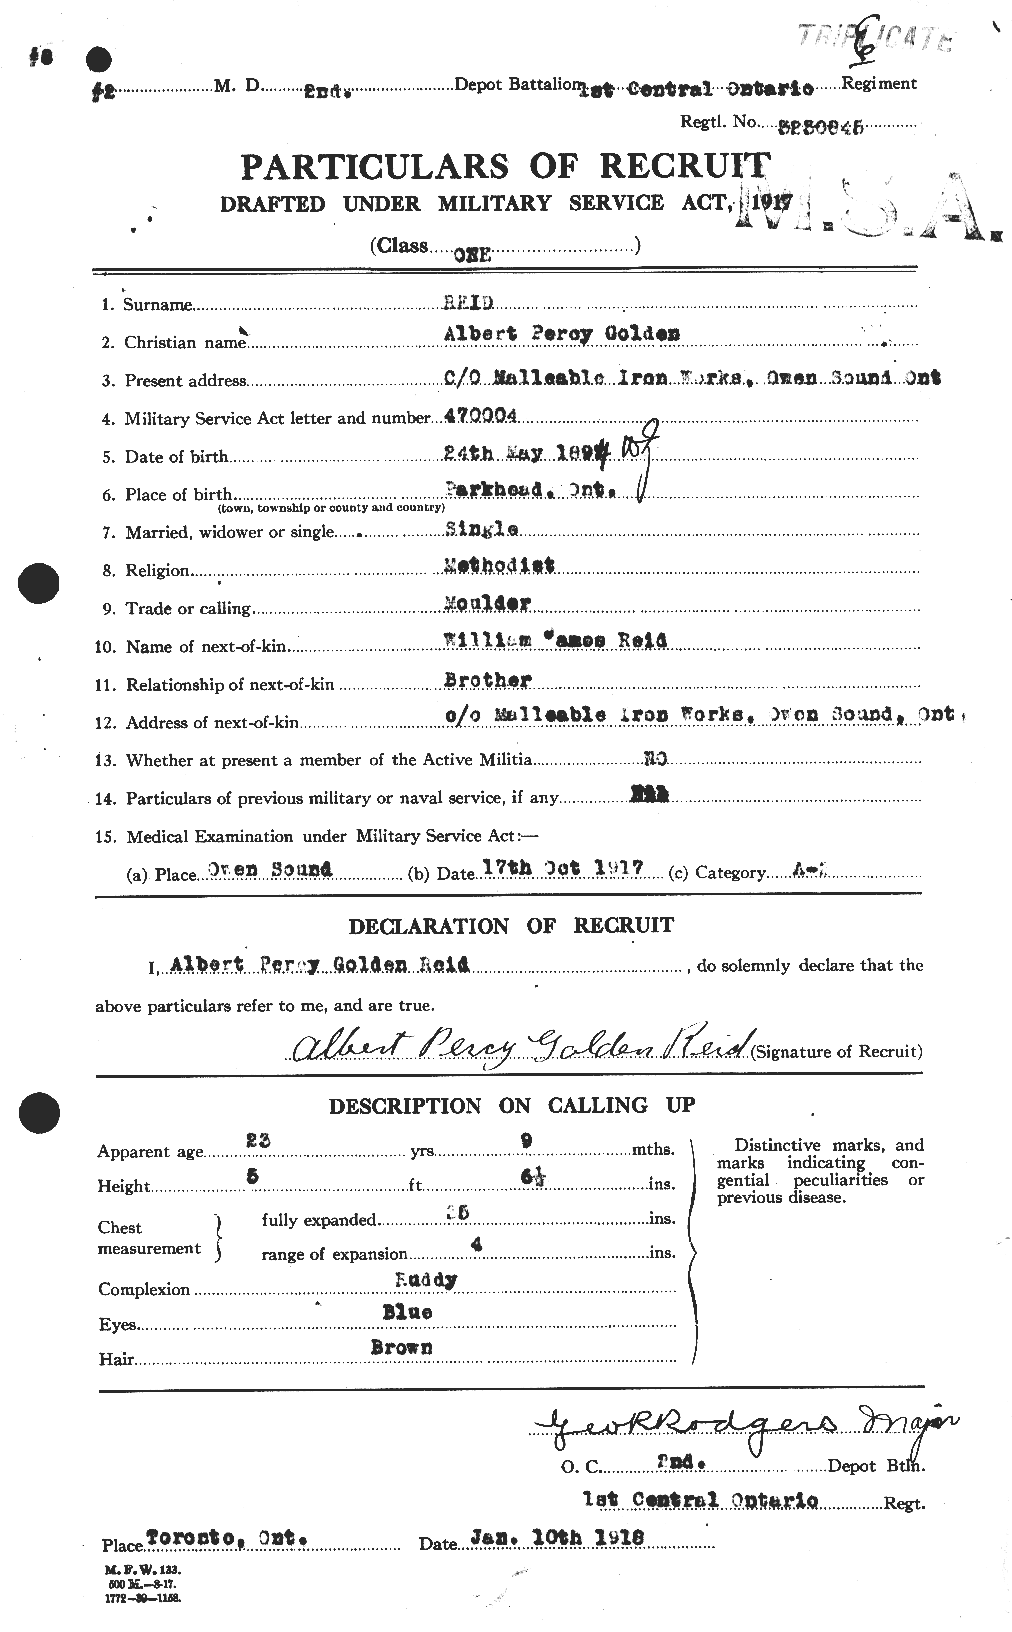 Personnel Records of the First World War - CEF 597747a